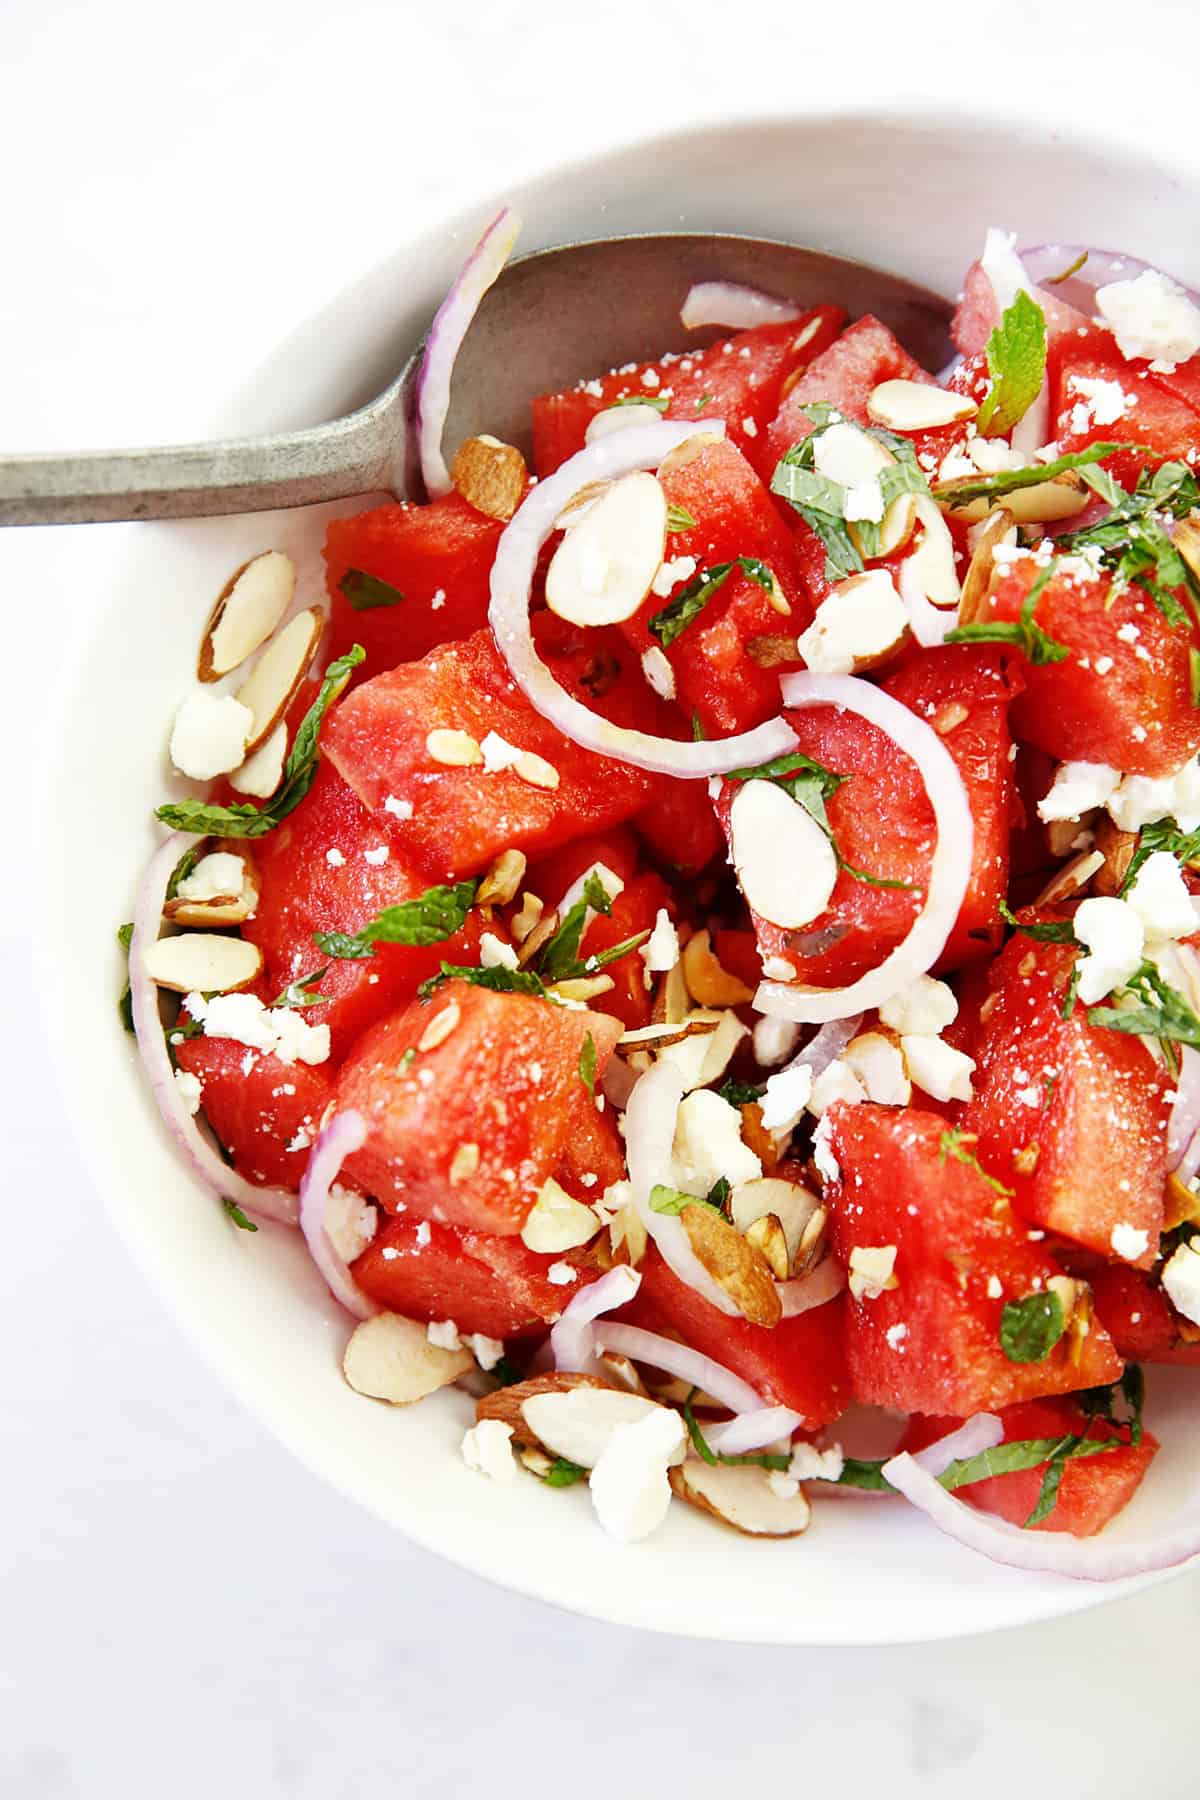 Watermelon salad with sliced onions and nuts